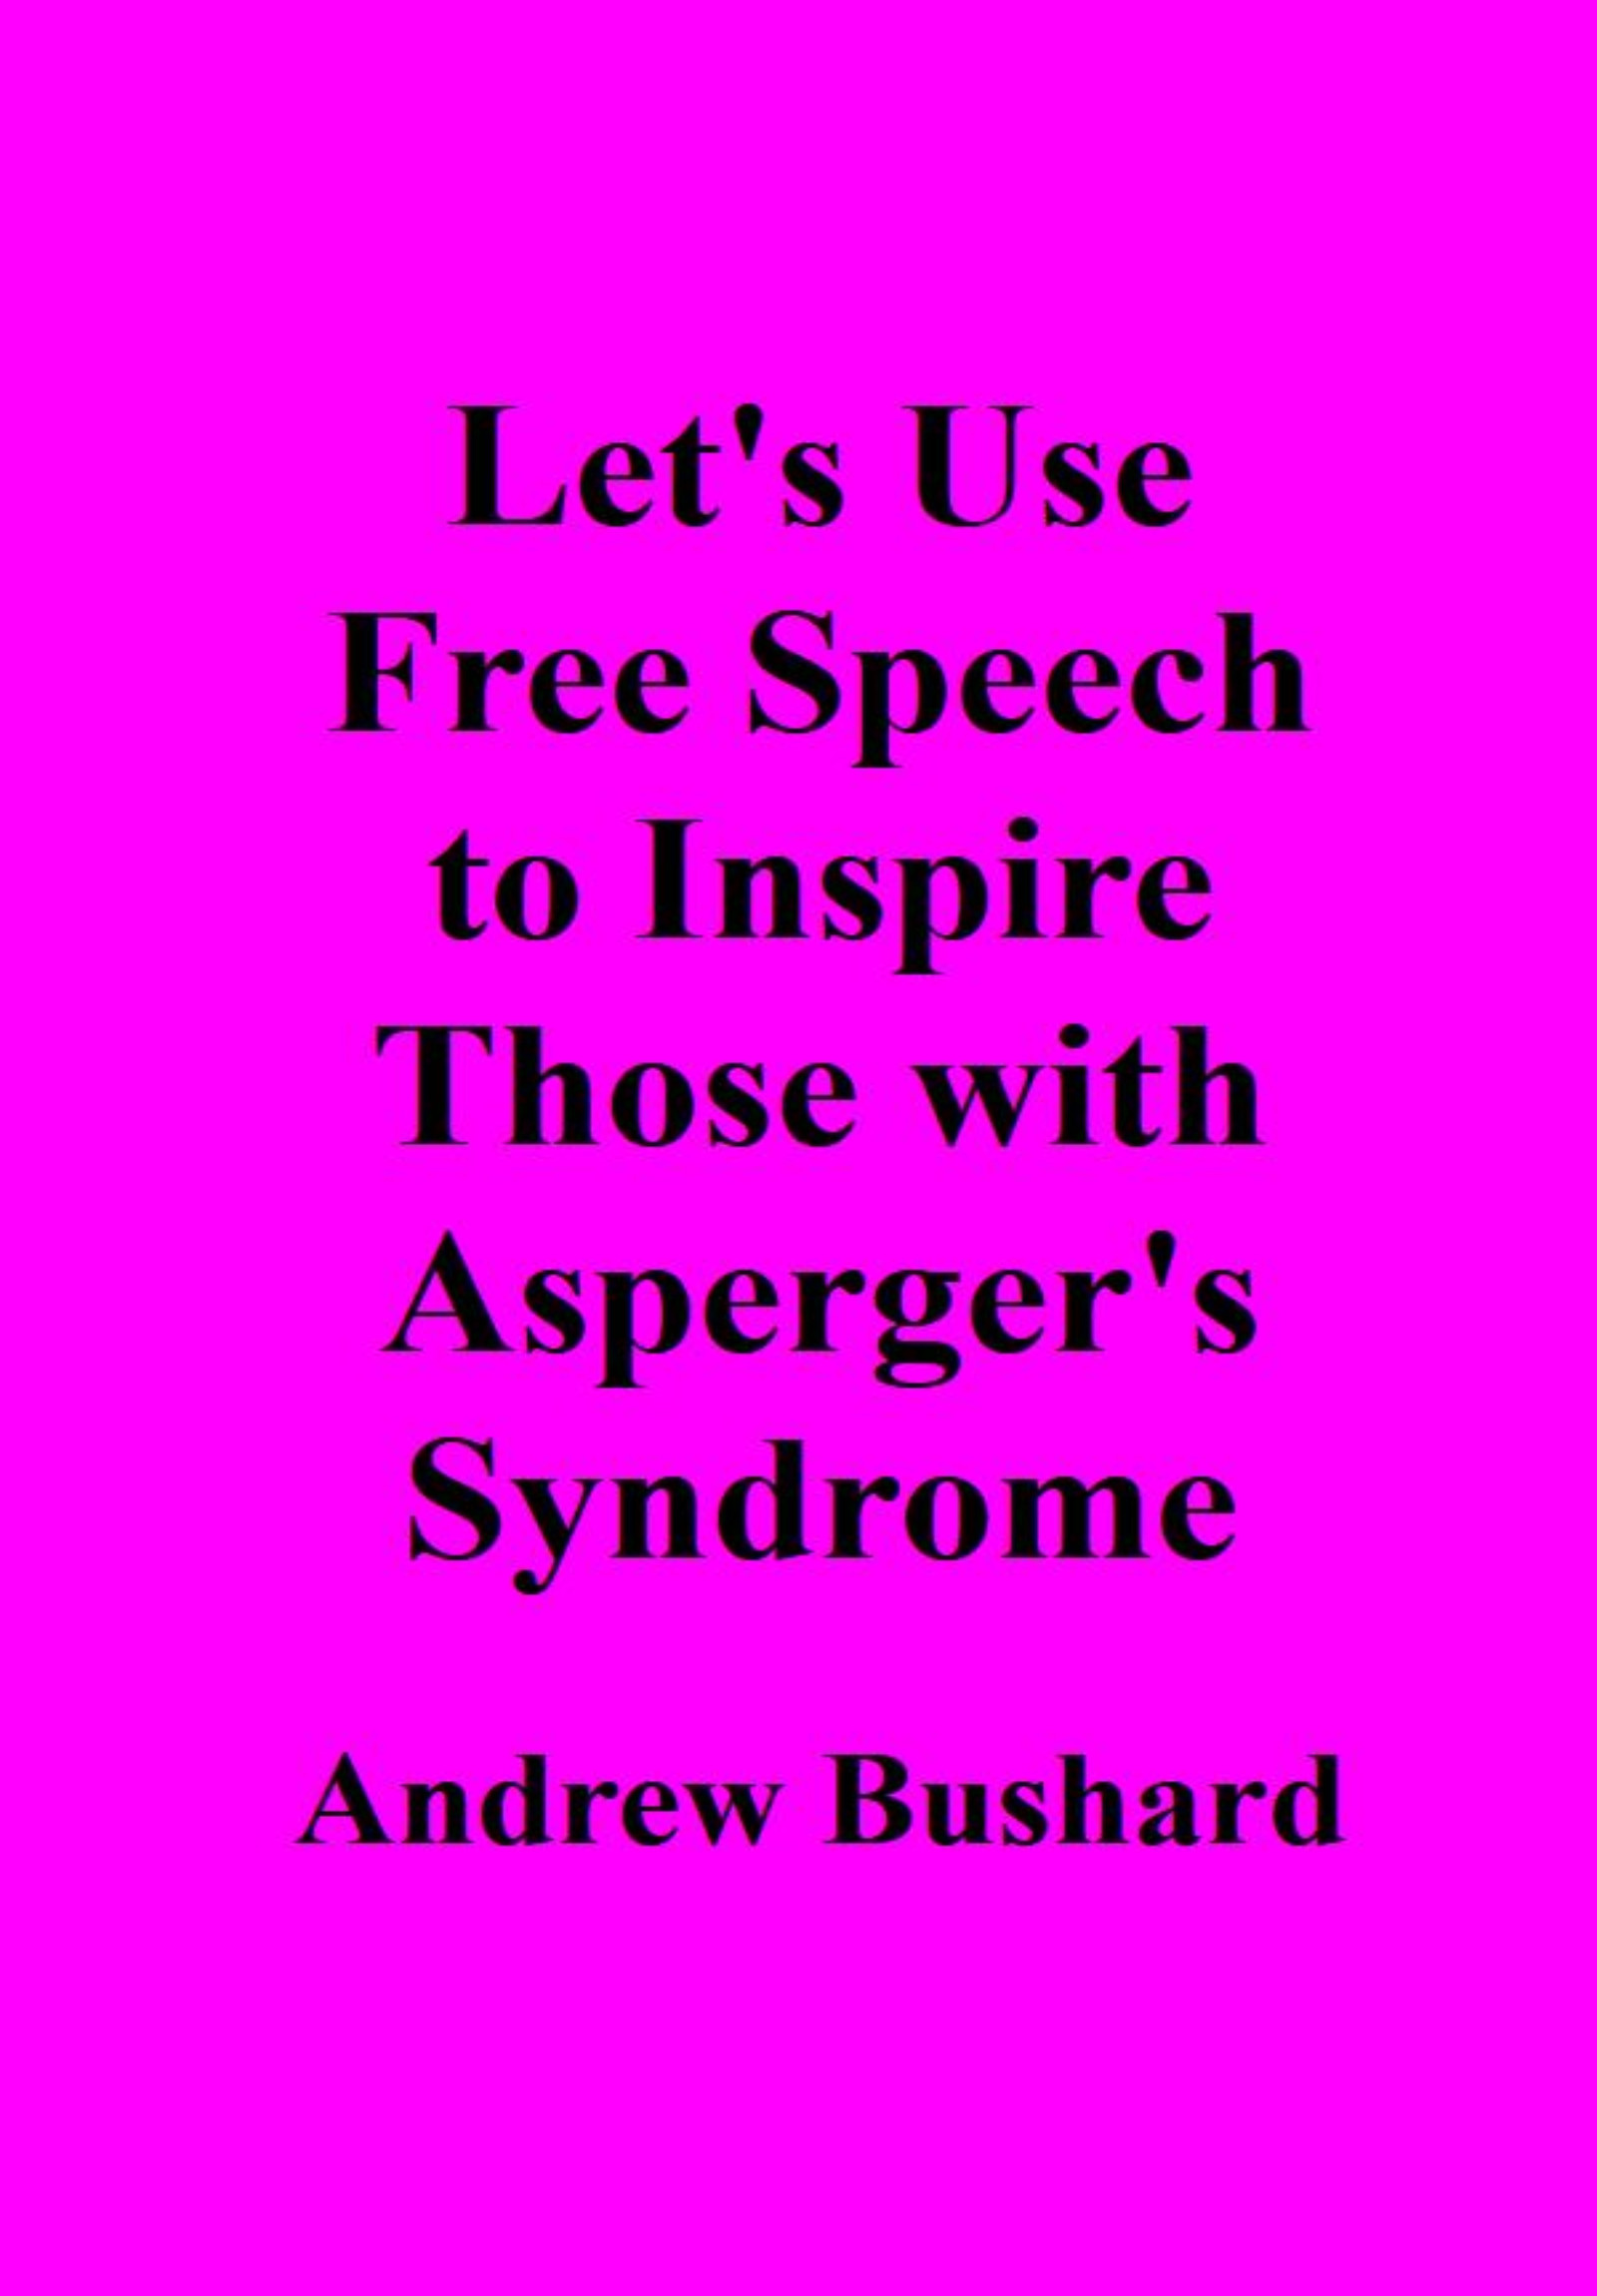 Let's Use Free Speech to Inspire Those with Asperger's Syndrome's featured image